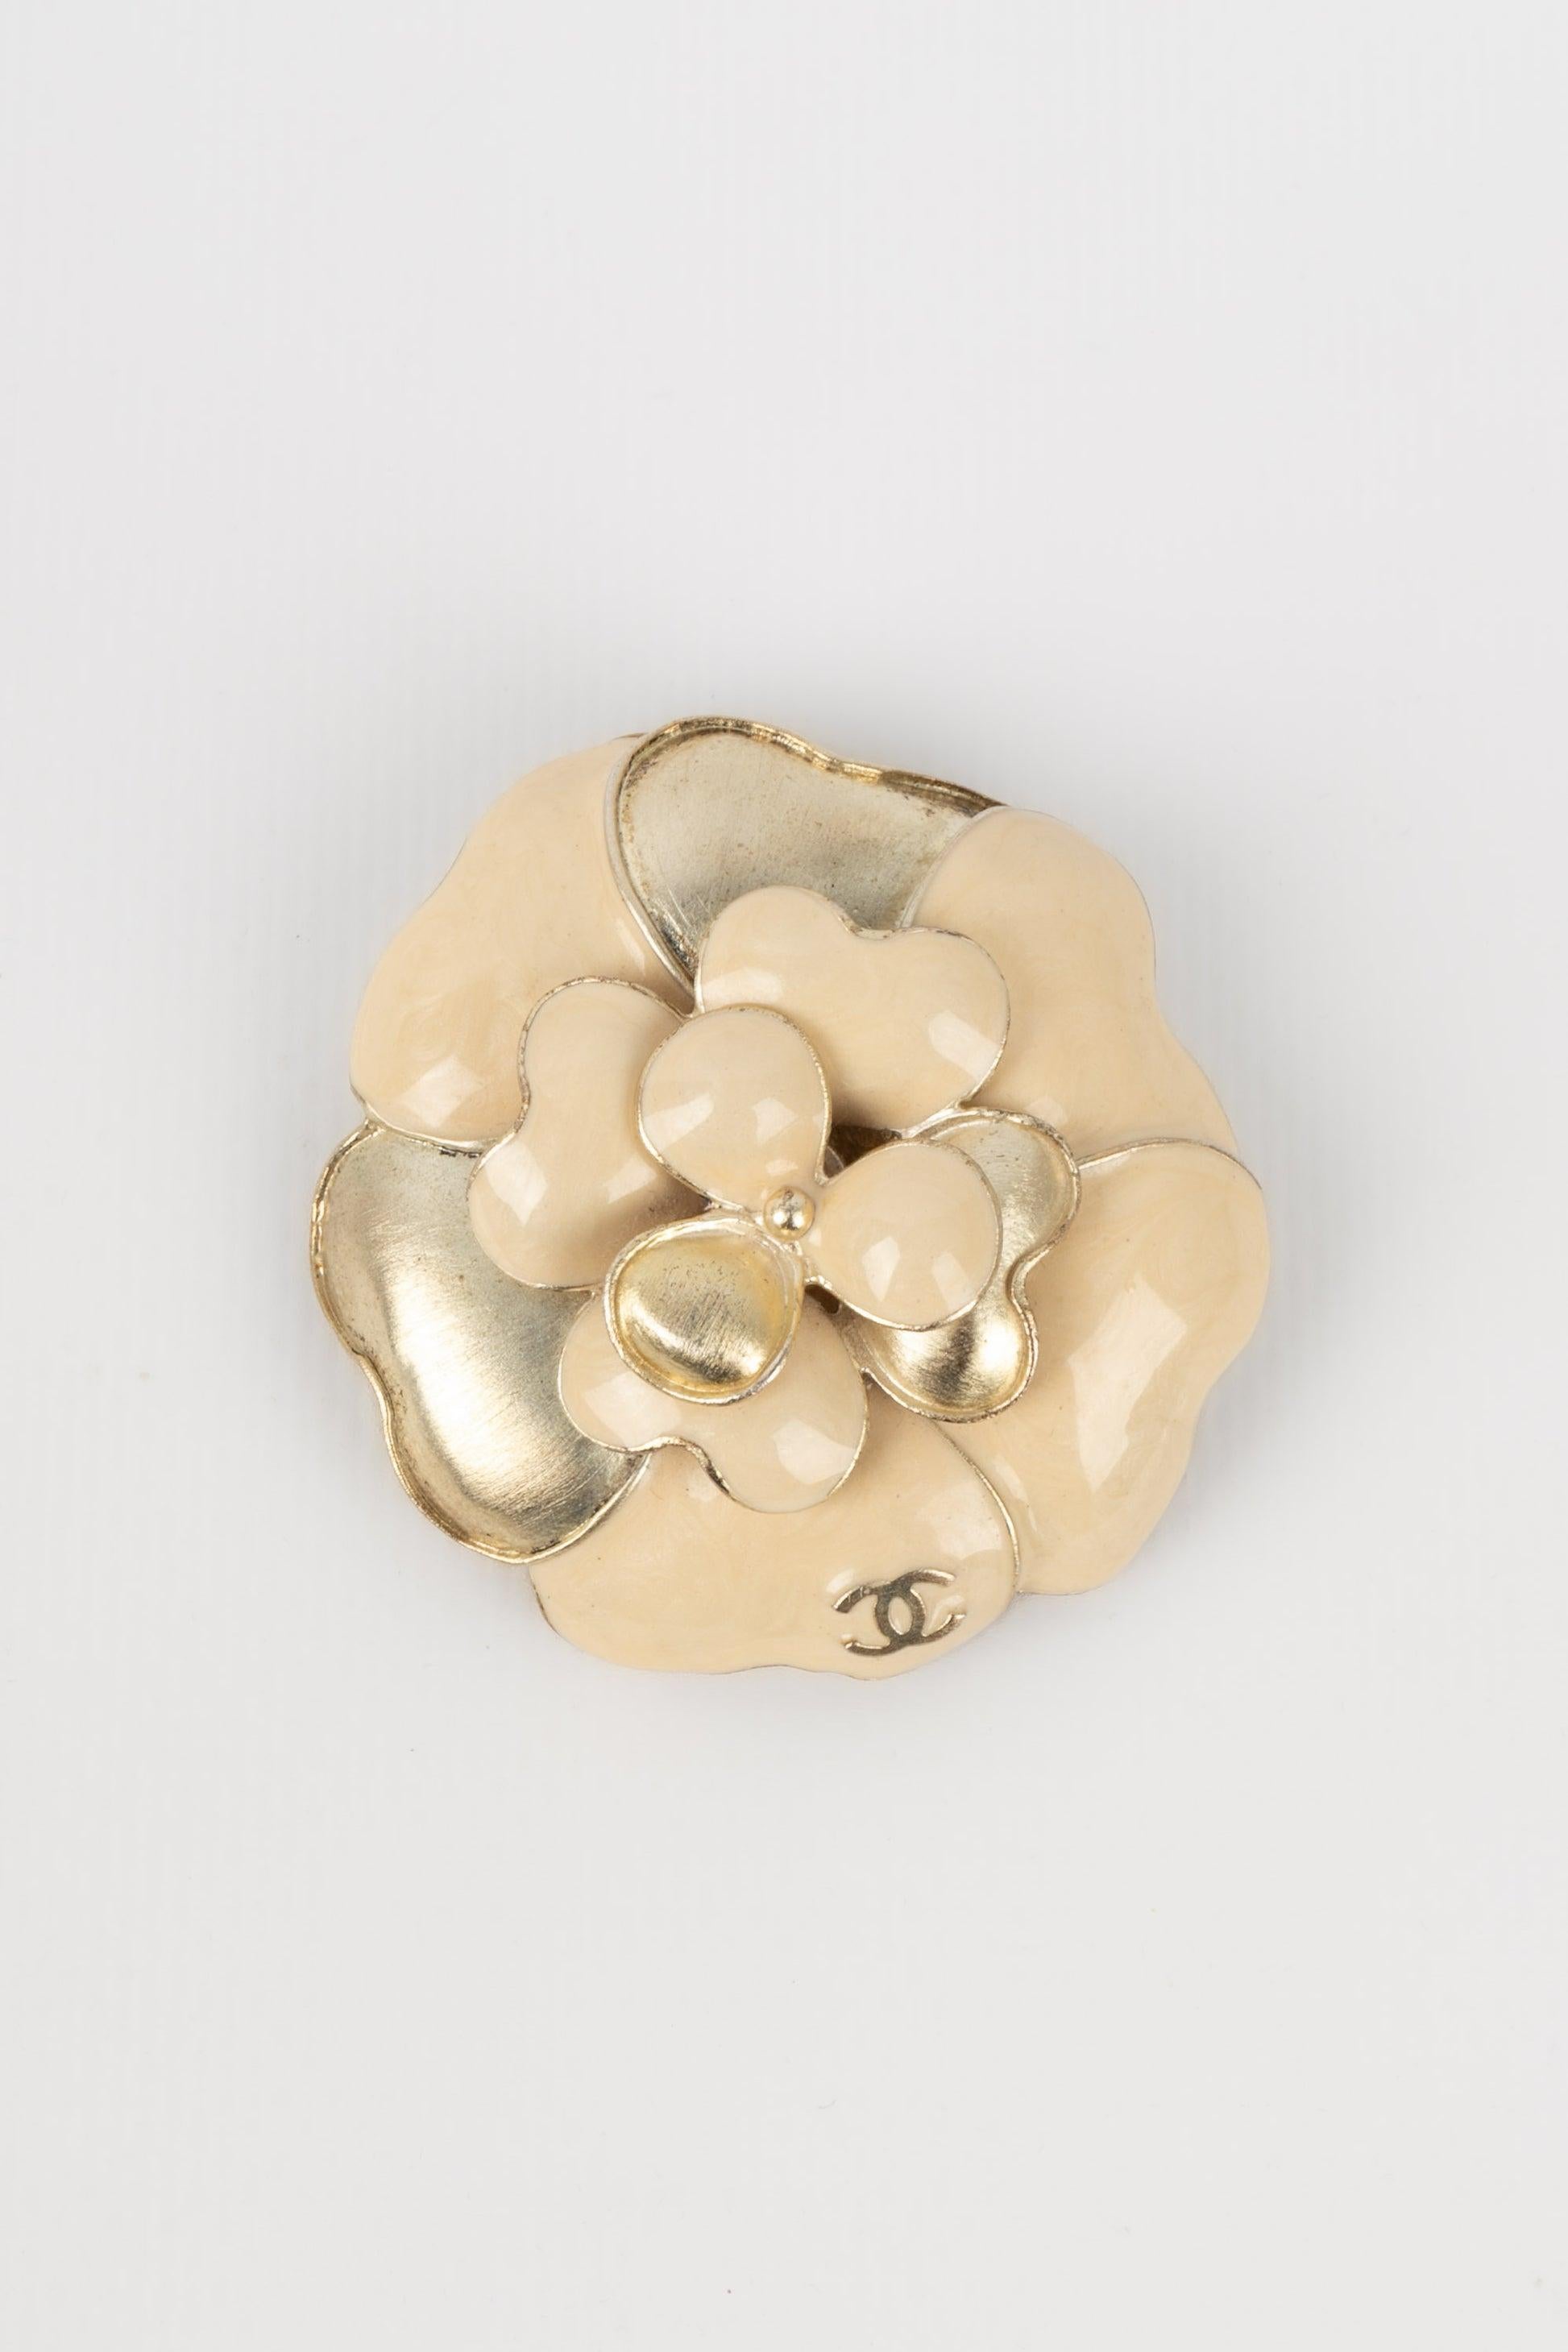 Chanel -(Made in France) Camellia pendant brooch in golden metal and beige enamel. Spring-Summer 2007 Collection.

Additional information:
Condition: Very good condition
Dimensions: Height: 4.5 cm

Seller Reference: BRB177
